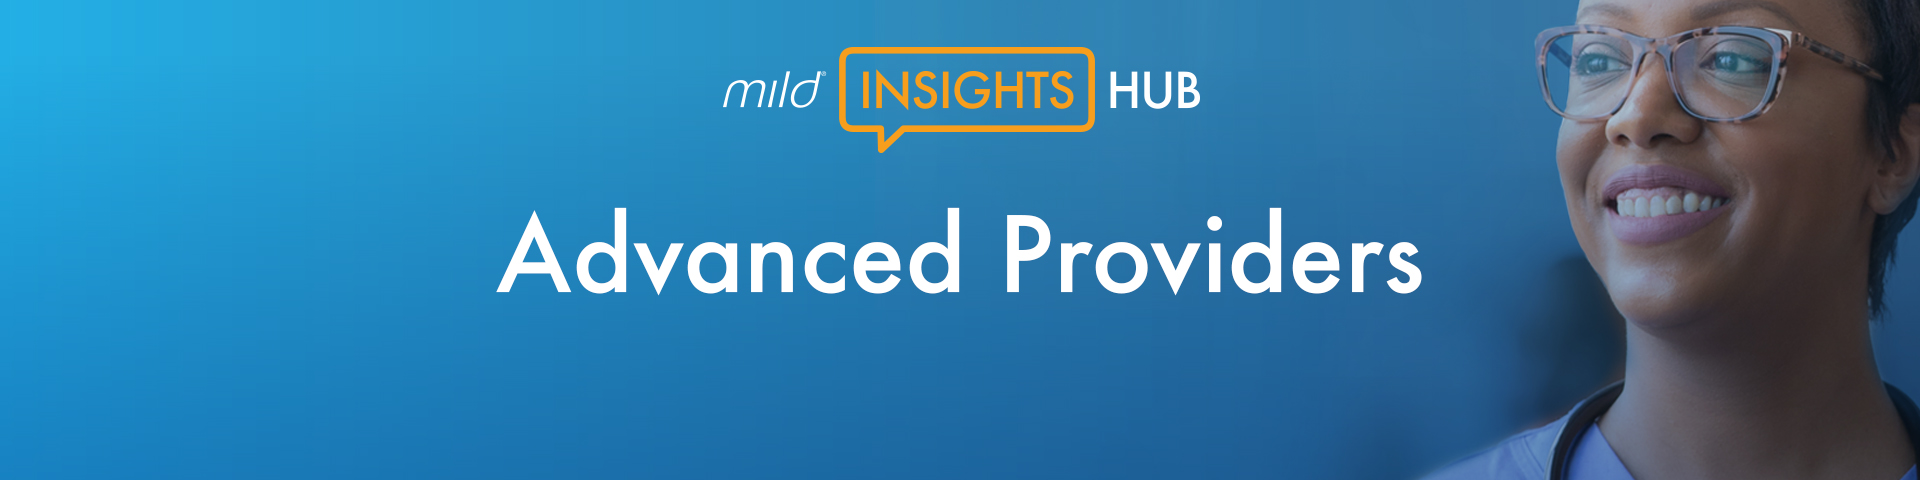 mild Insights Hub Banner Image - APPs (Advanced Practice Providers)